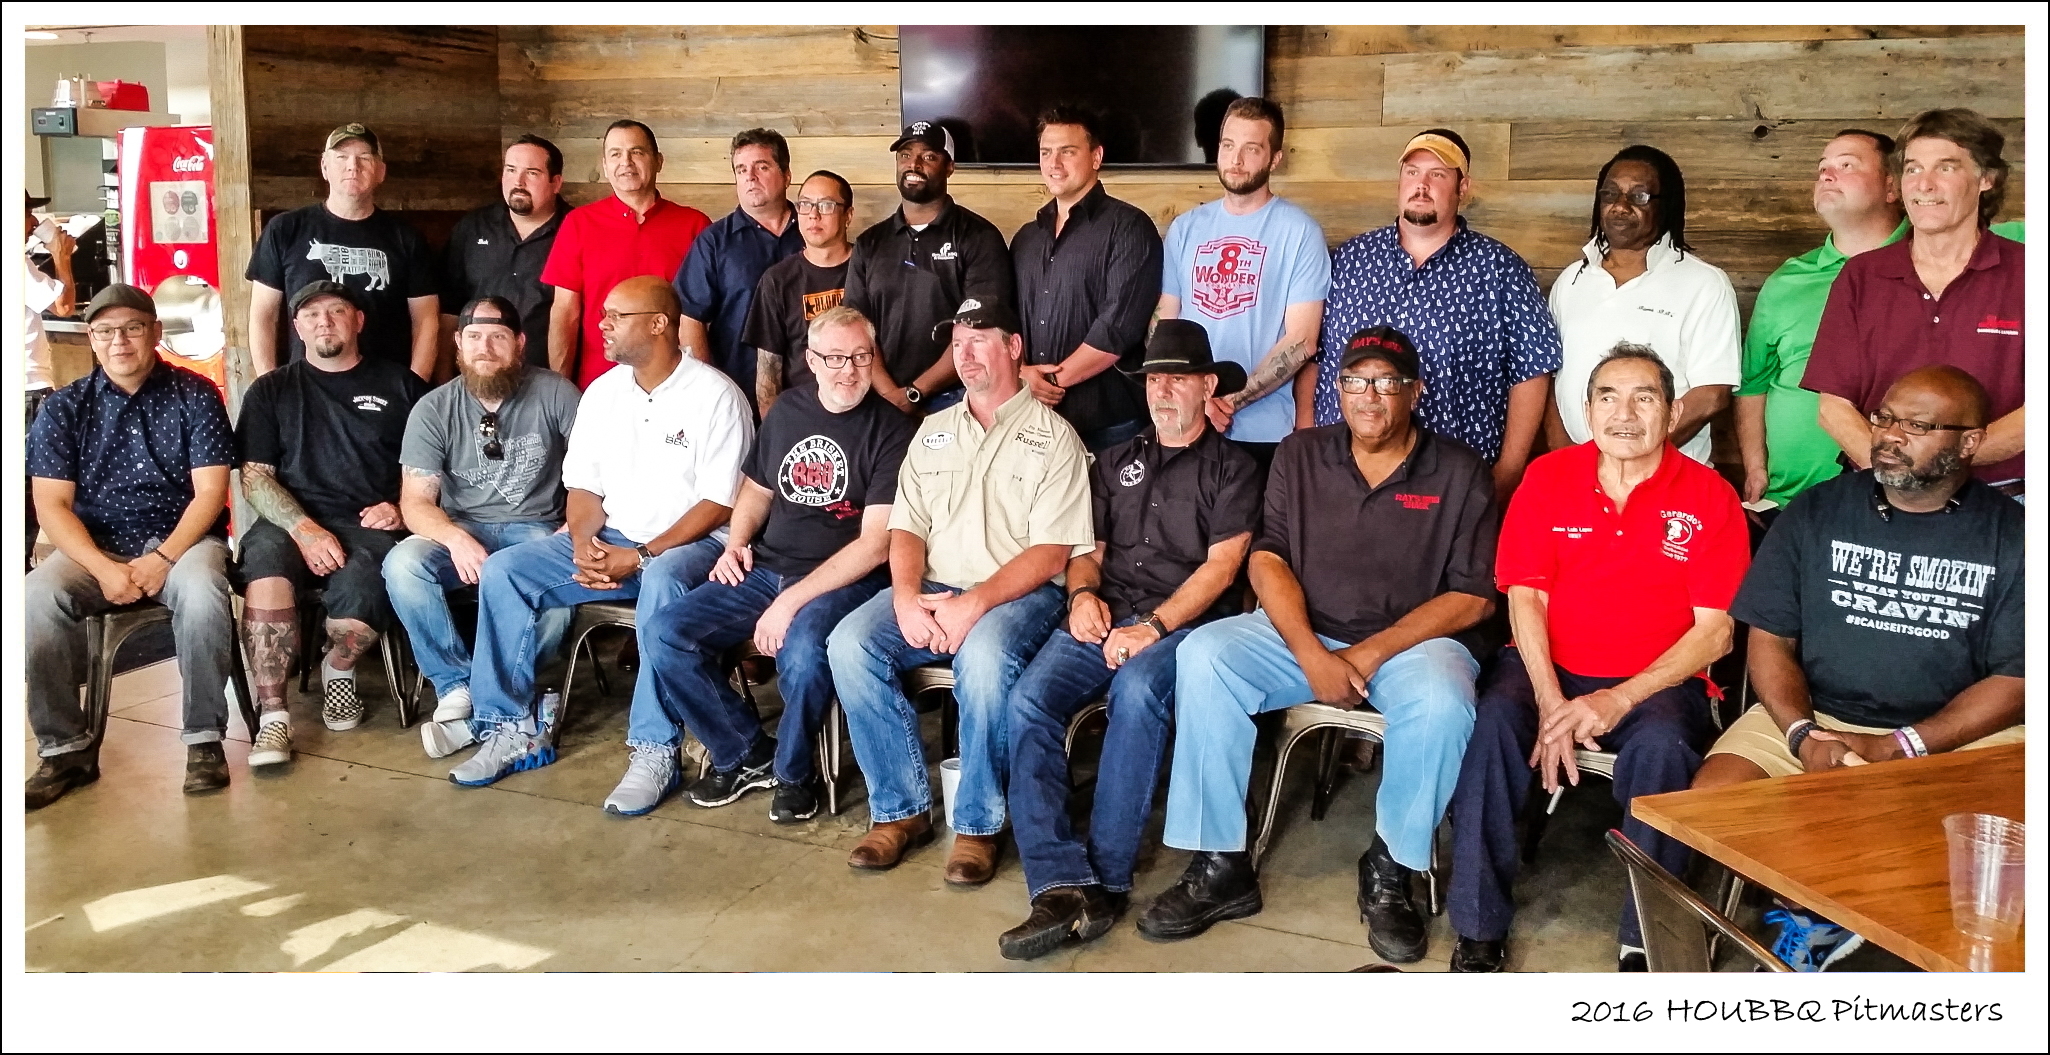 2016 HOUBBQ Festival Pitmasters